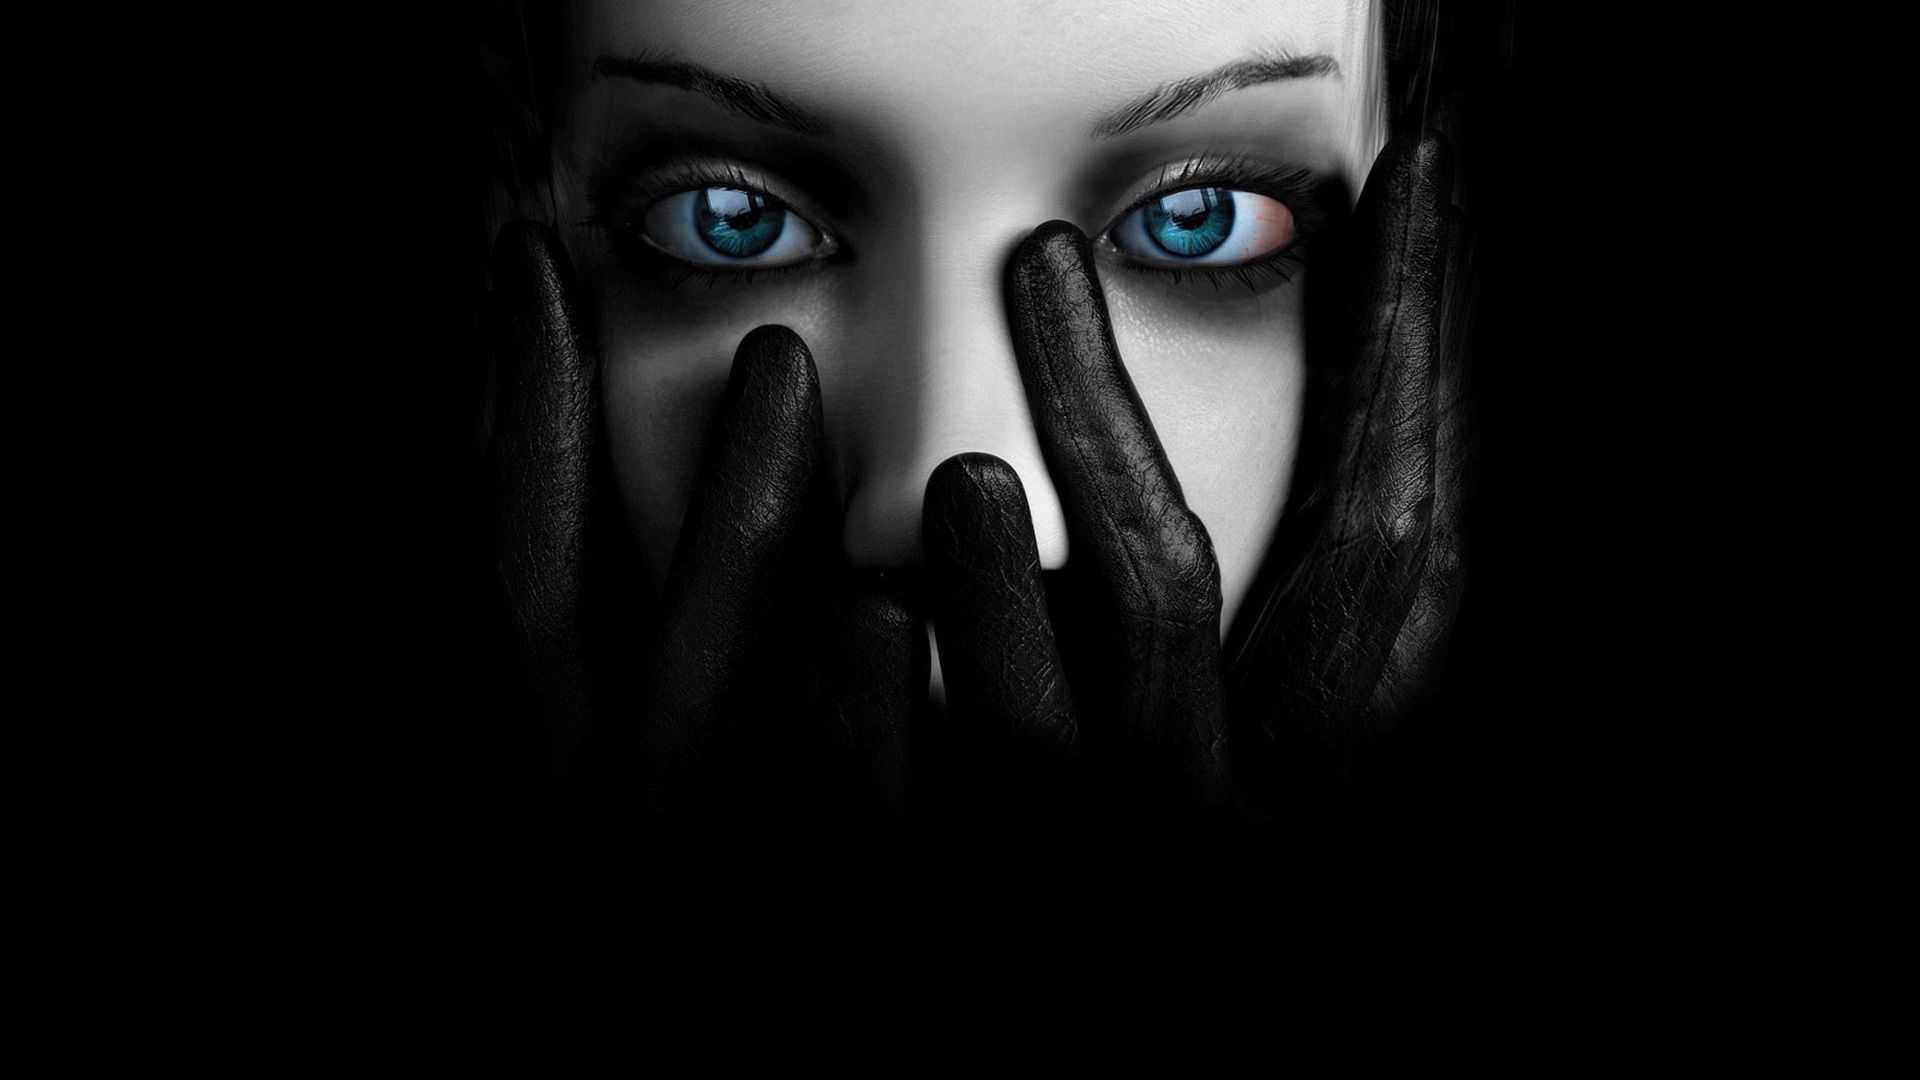 Download Wallpaper Blue Eyed Girl Covers Her Face With Hands